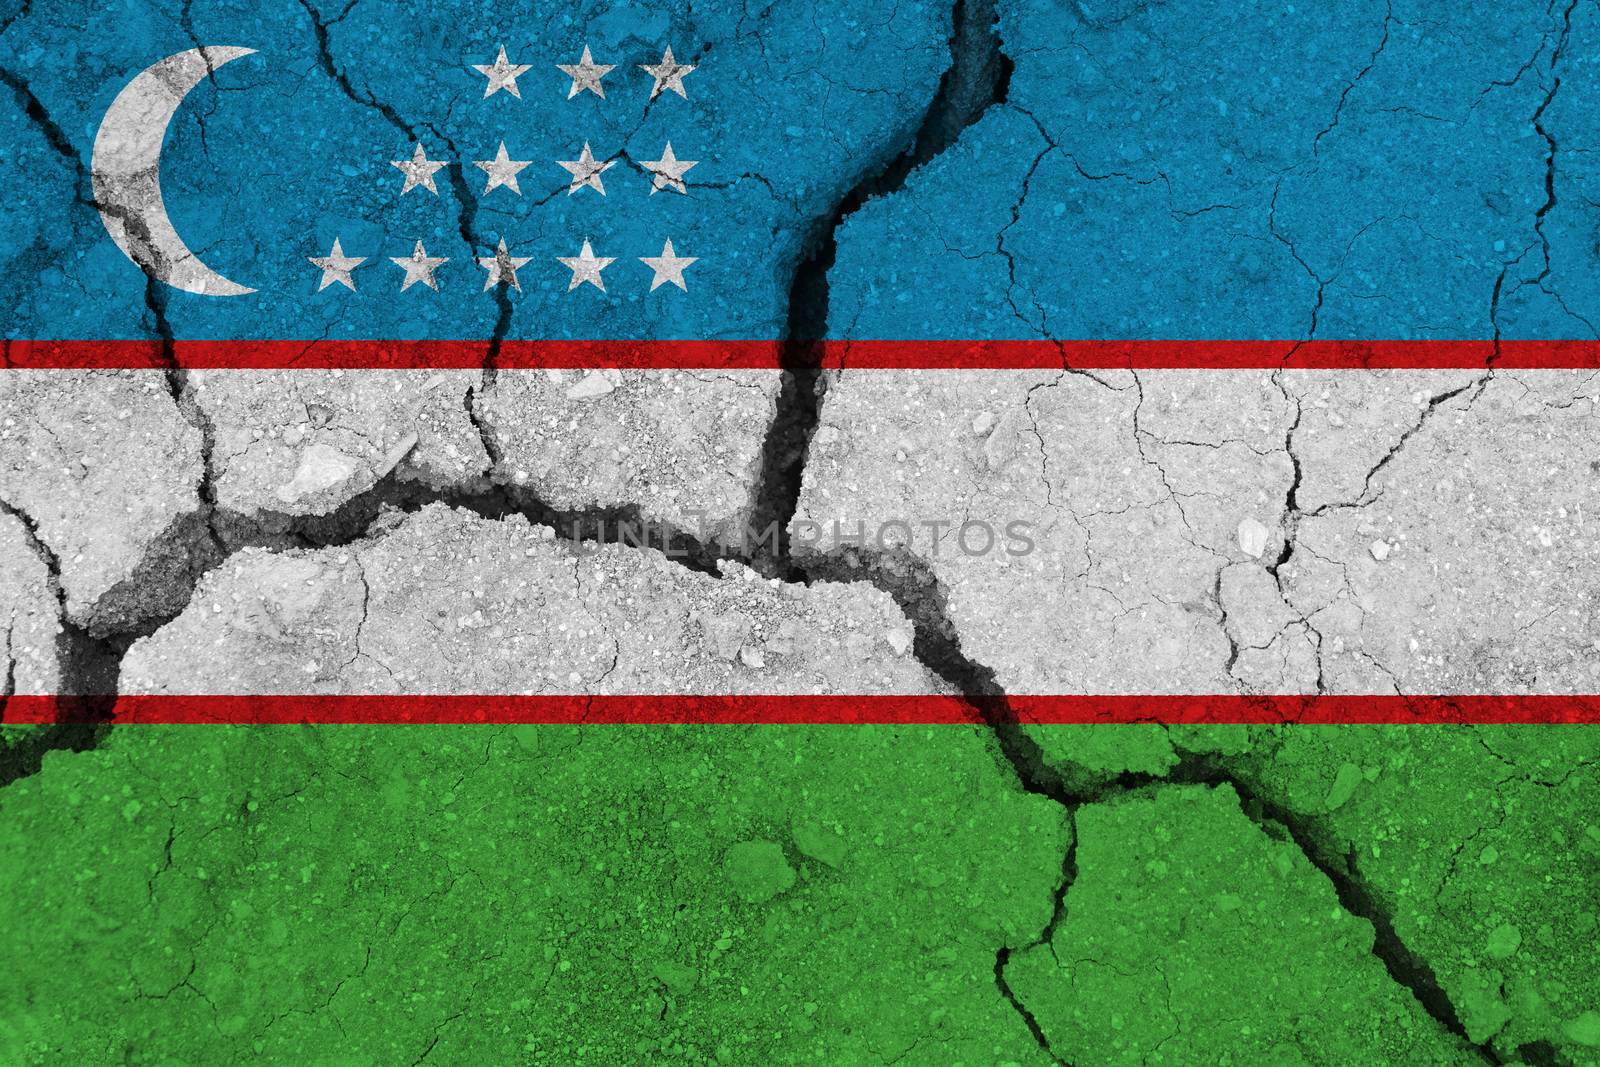 Uzbekistan flag on the cracked earth by Visual-Content